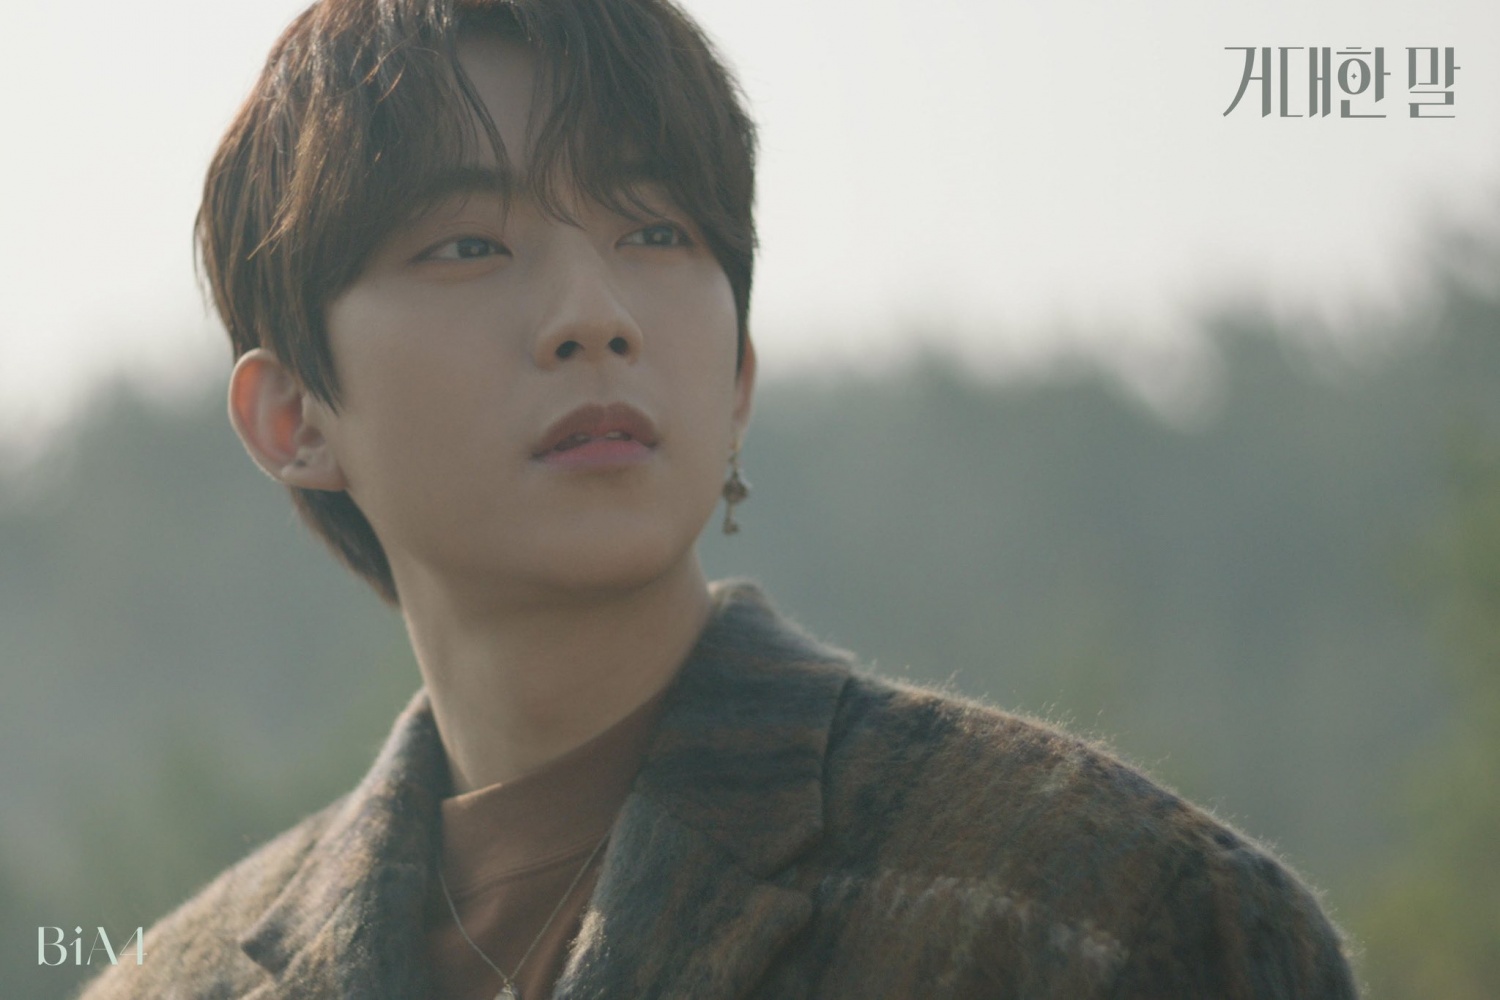 B1A4 releases new single 'Adore you' MV teaser... lyrical emotion